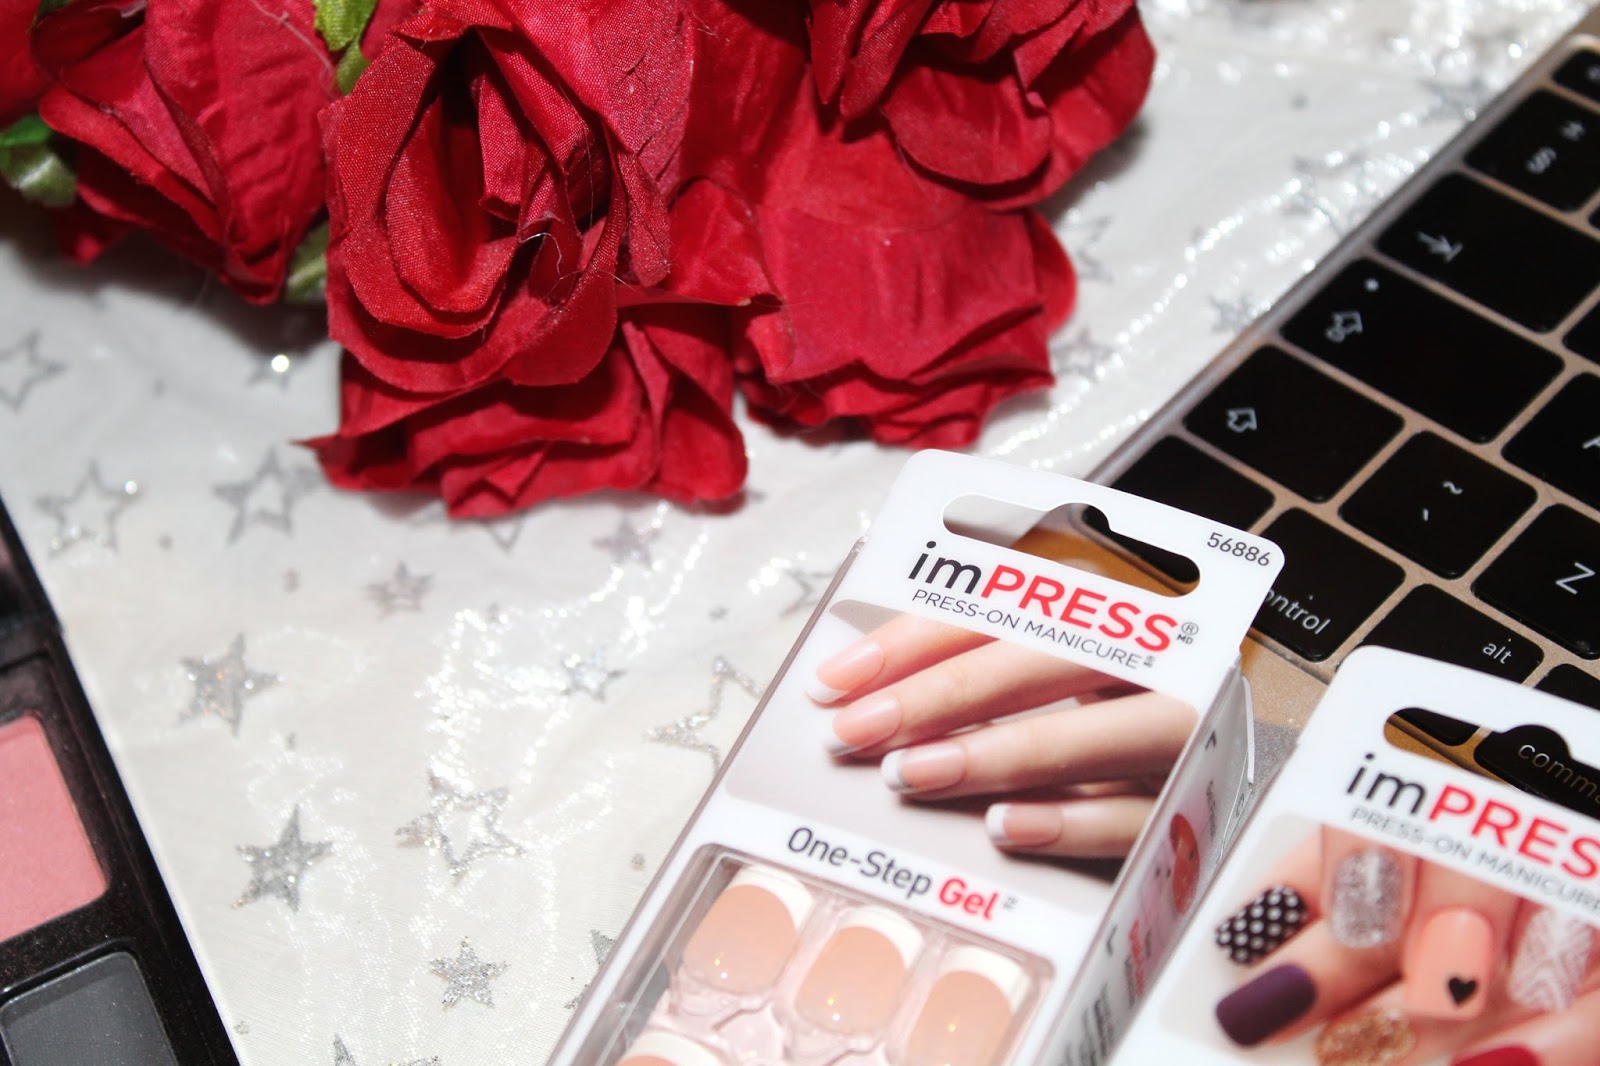 Impress Press on nails in the boxes 